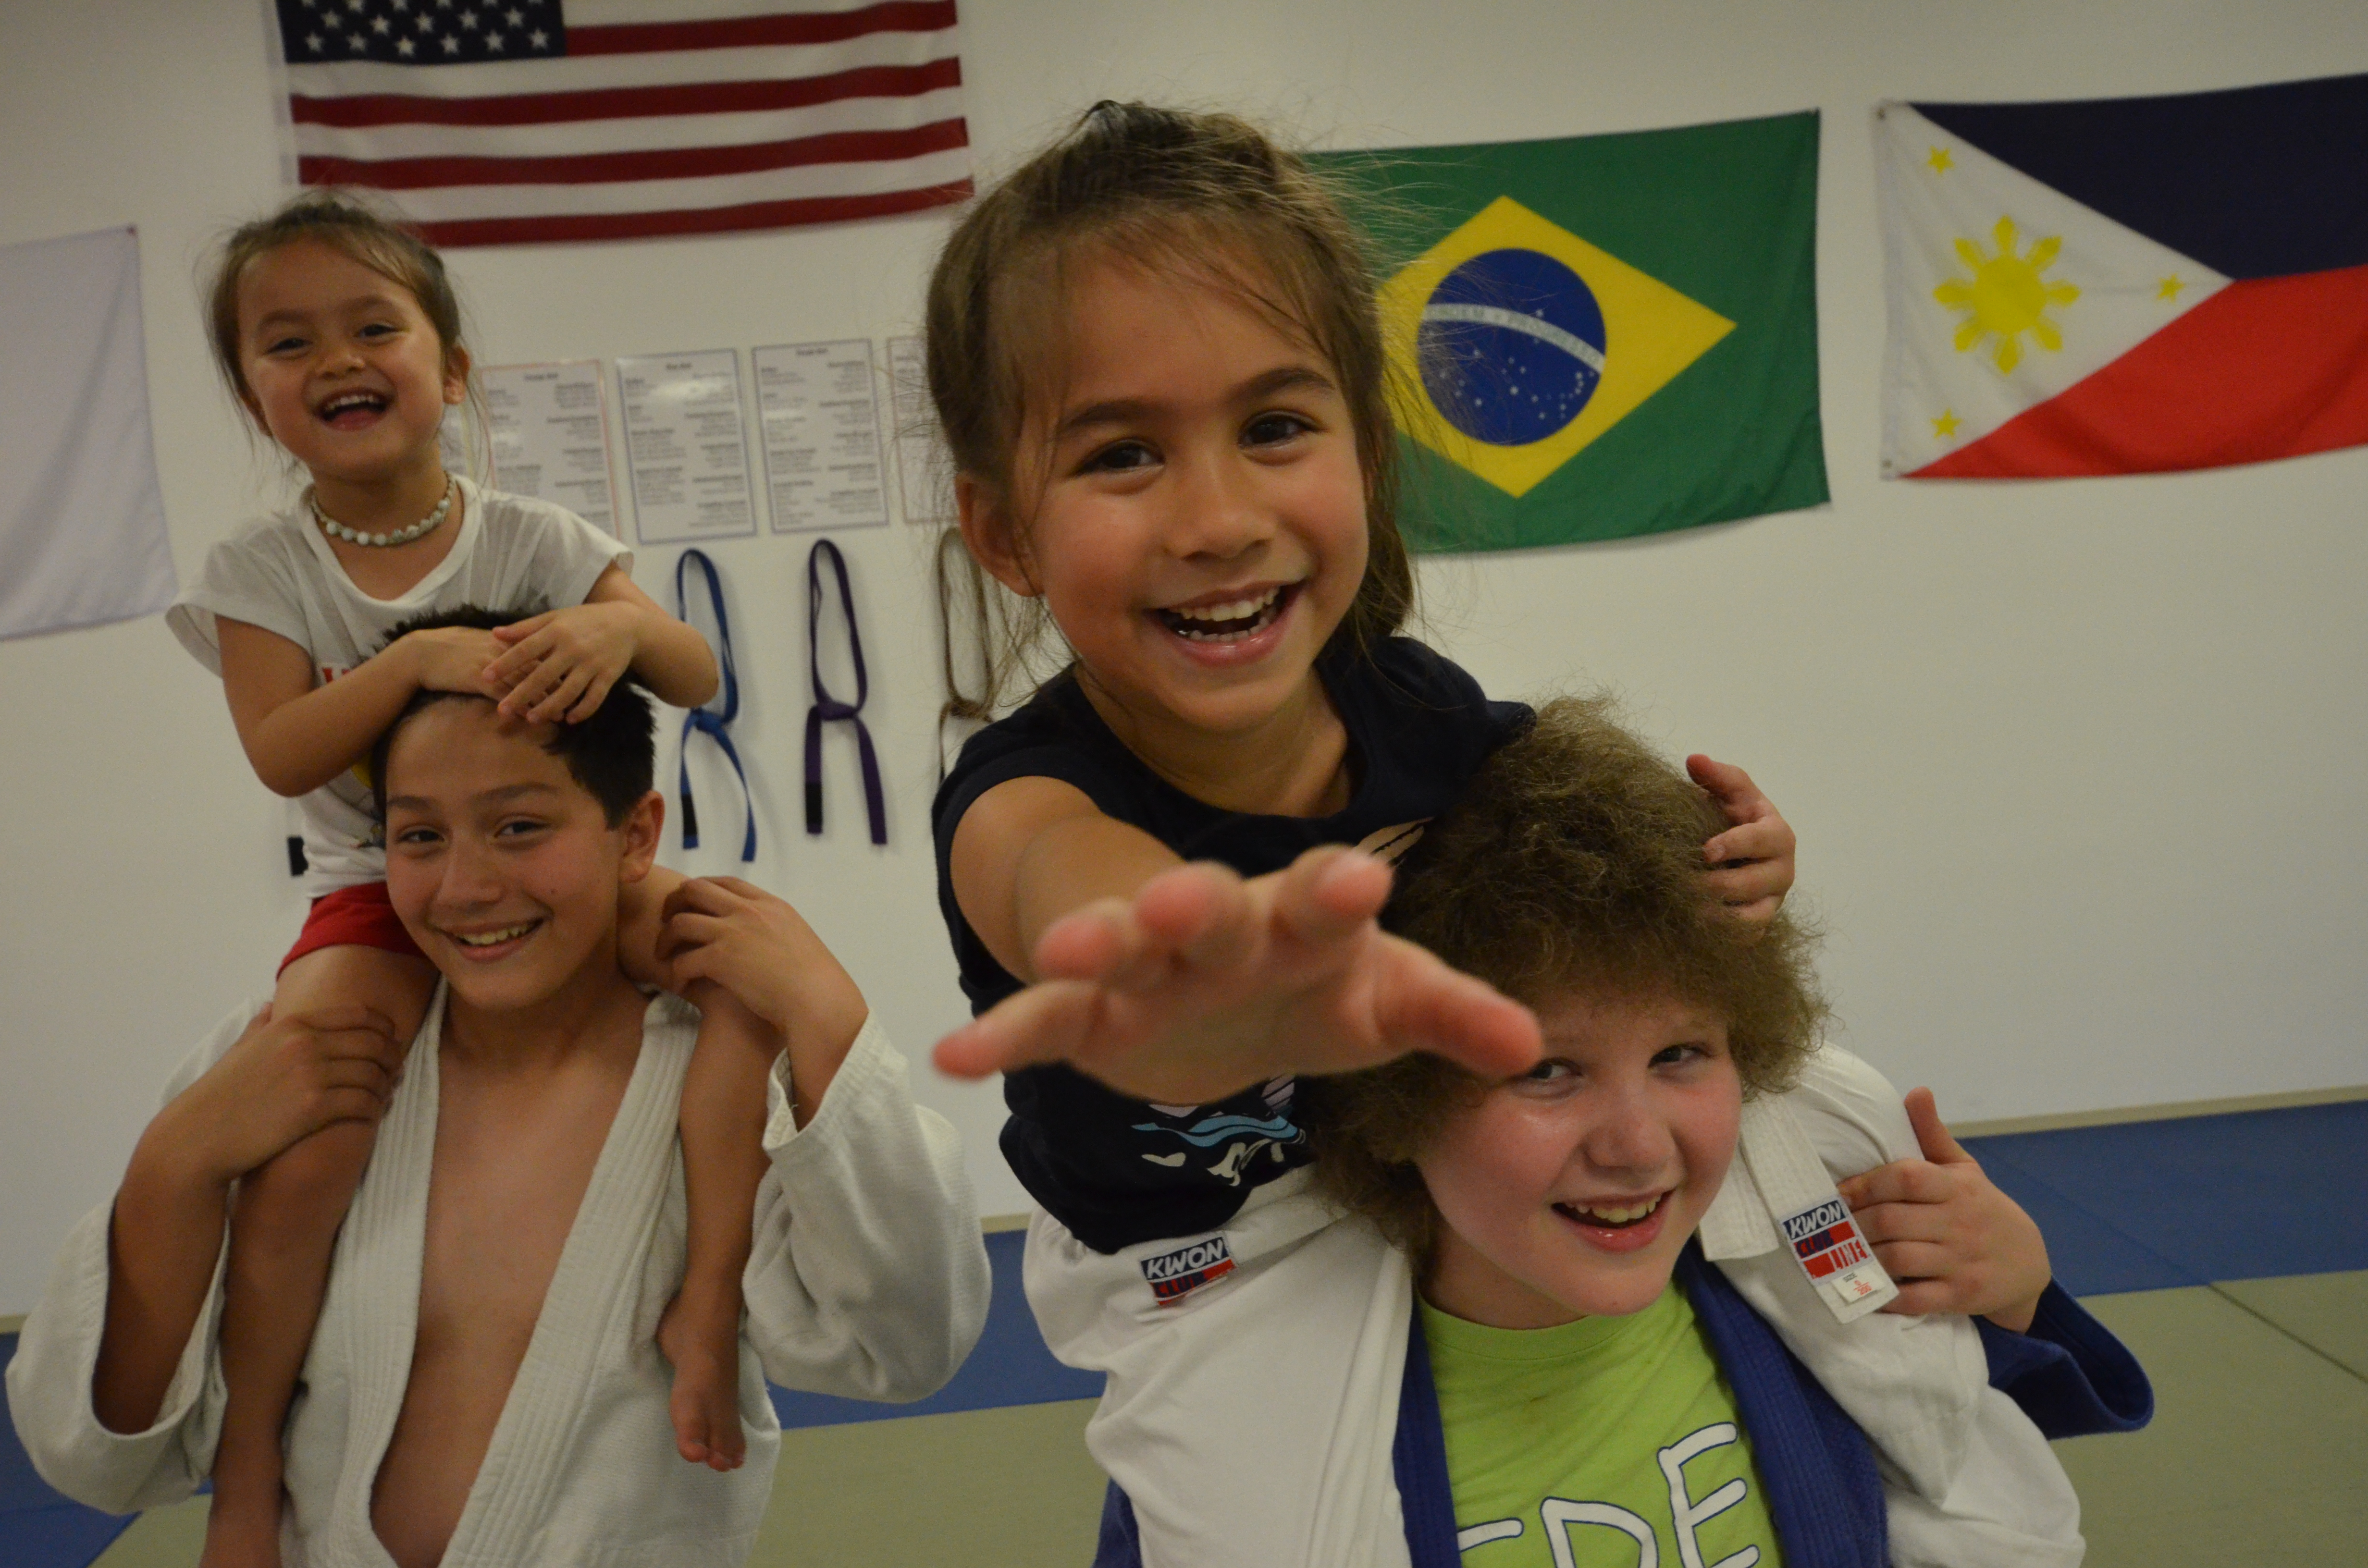 7 Reasons Why Your Kids Should Do Grappling Sports Instead of Team Sports